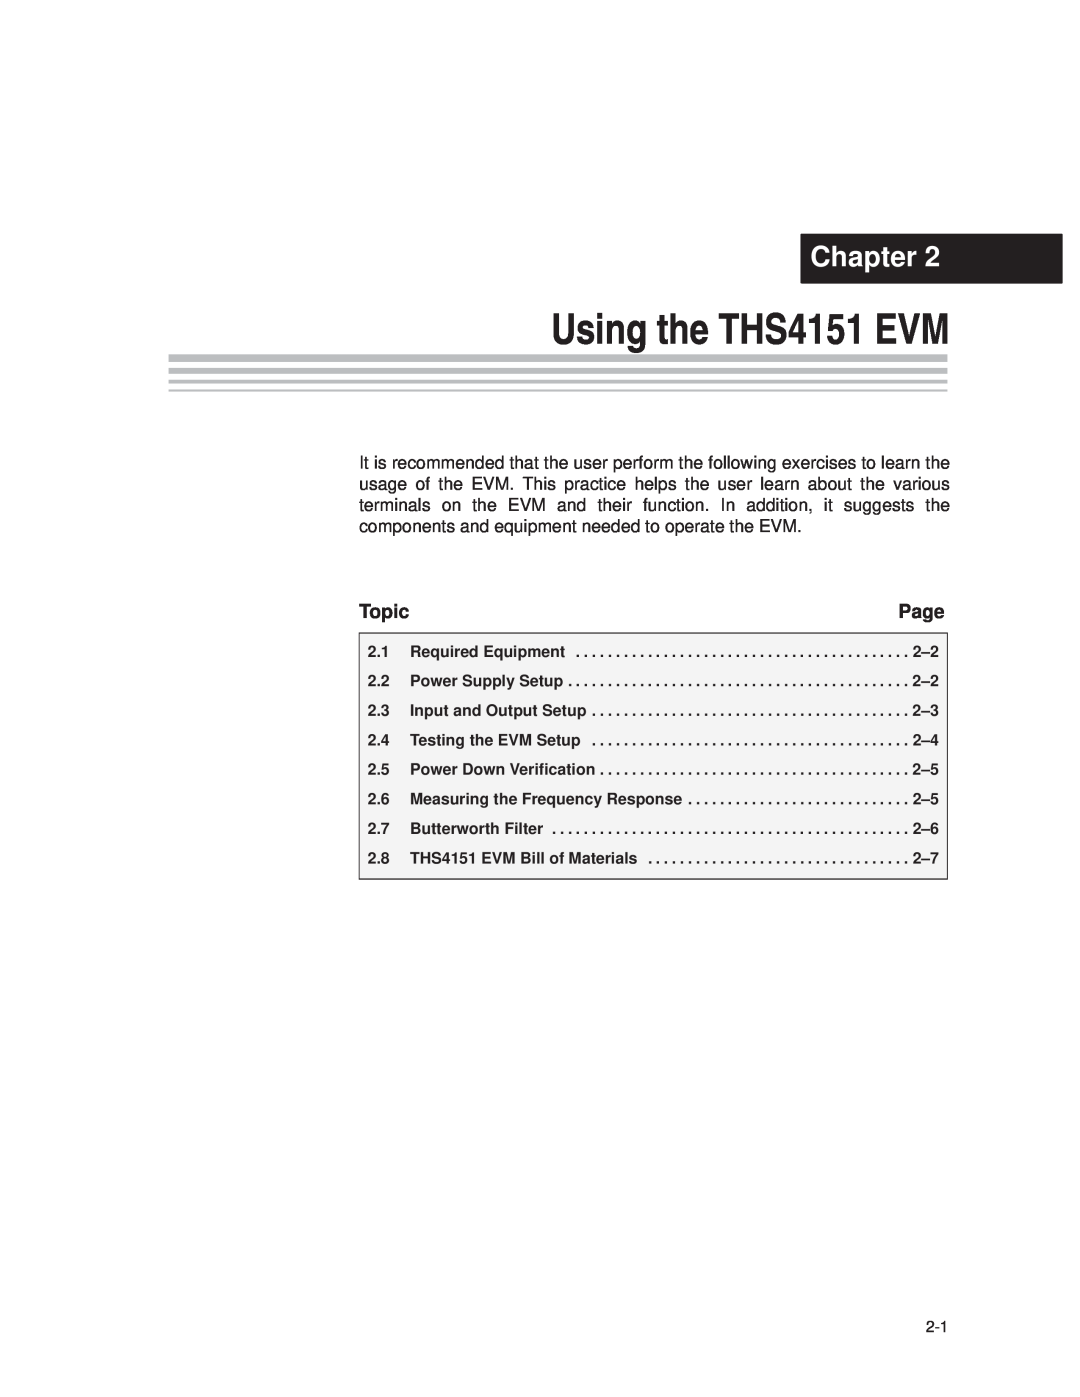 Texas Instruments manual Using the THS4151 EVM, Chapter, Page, Topic 